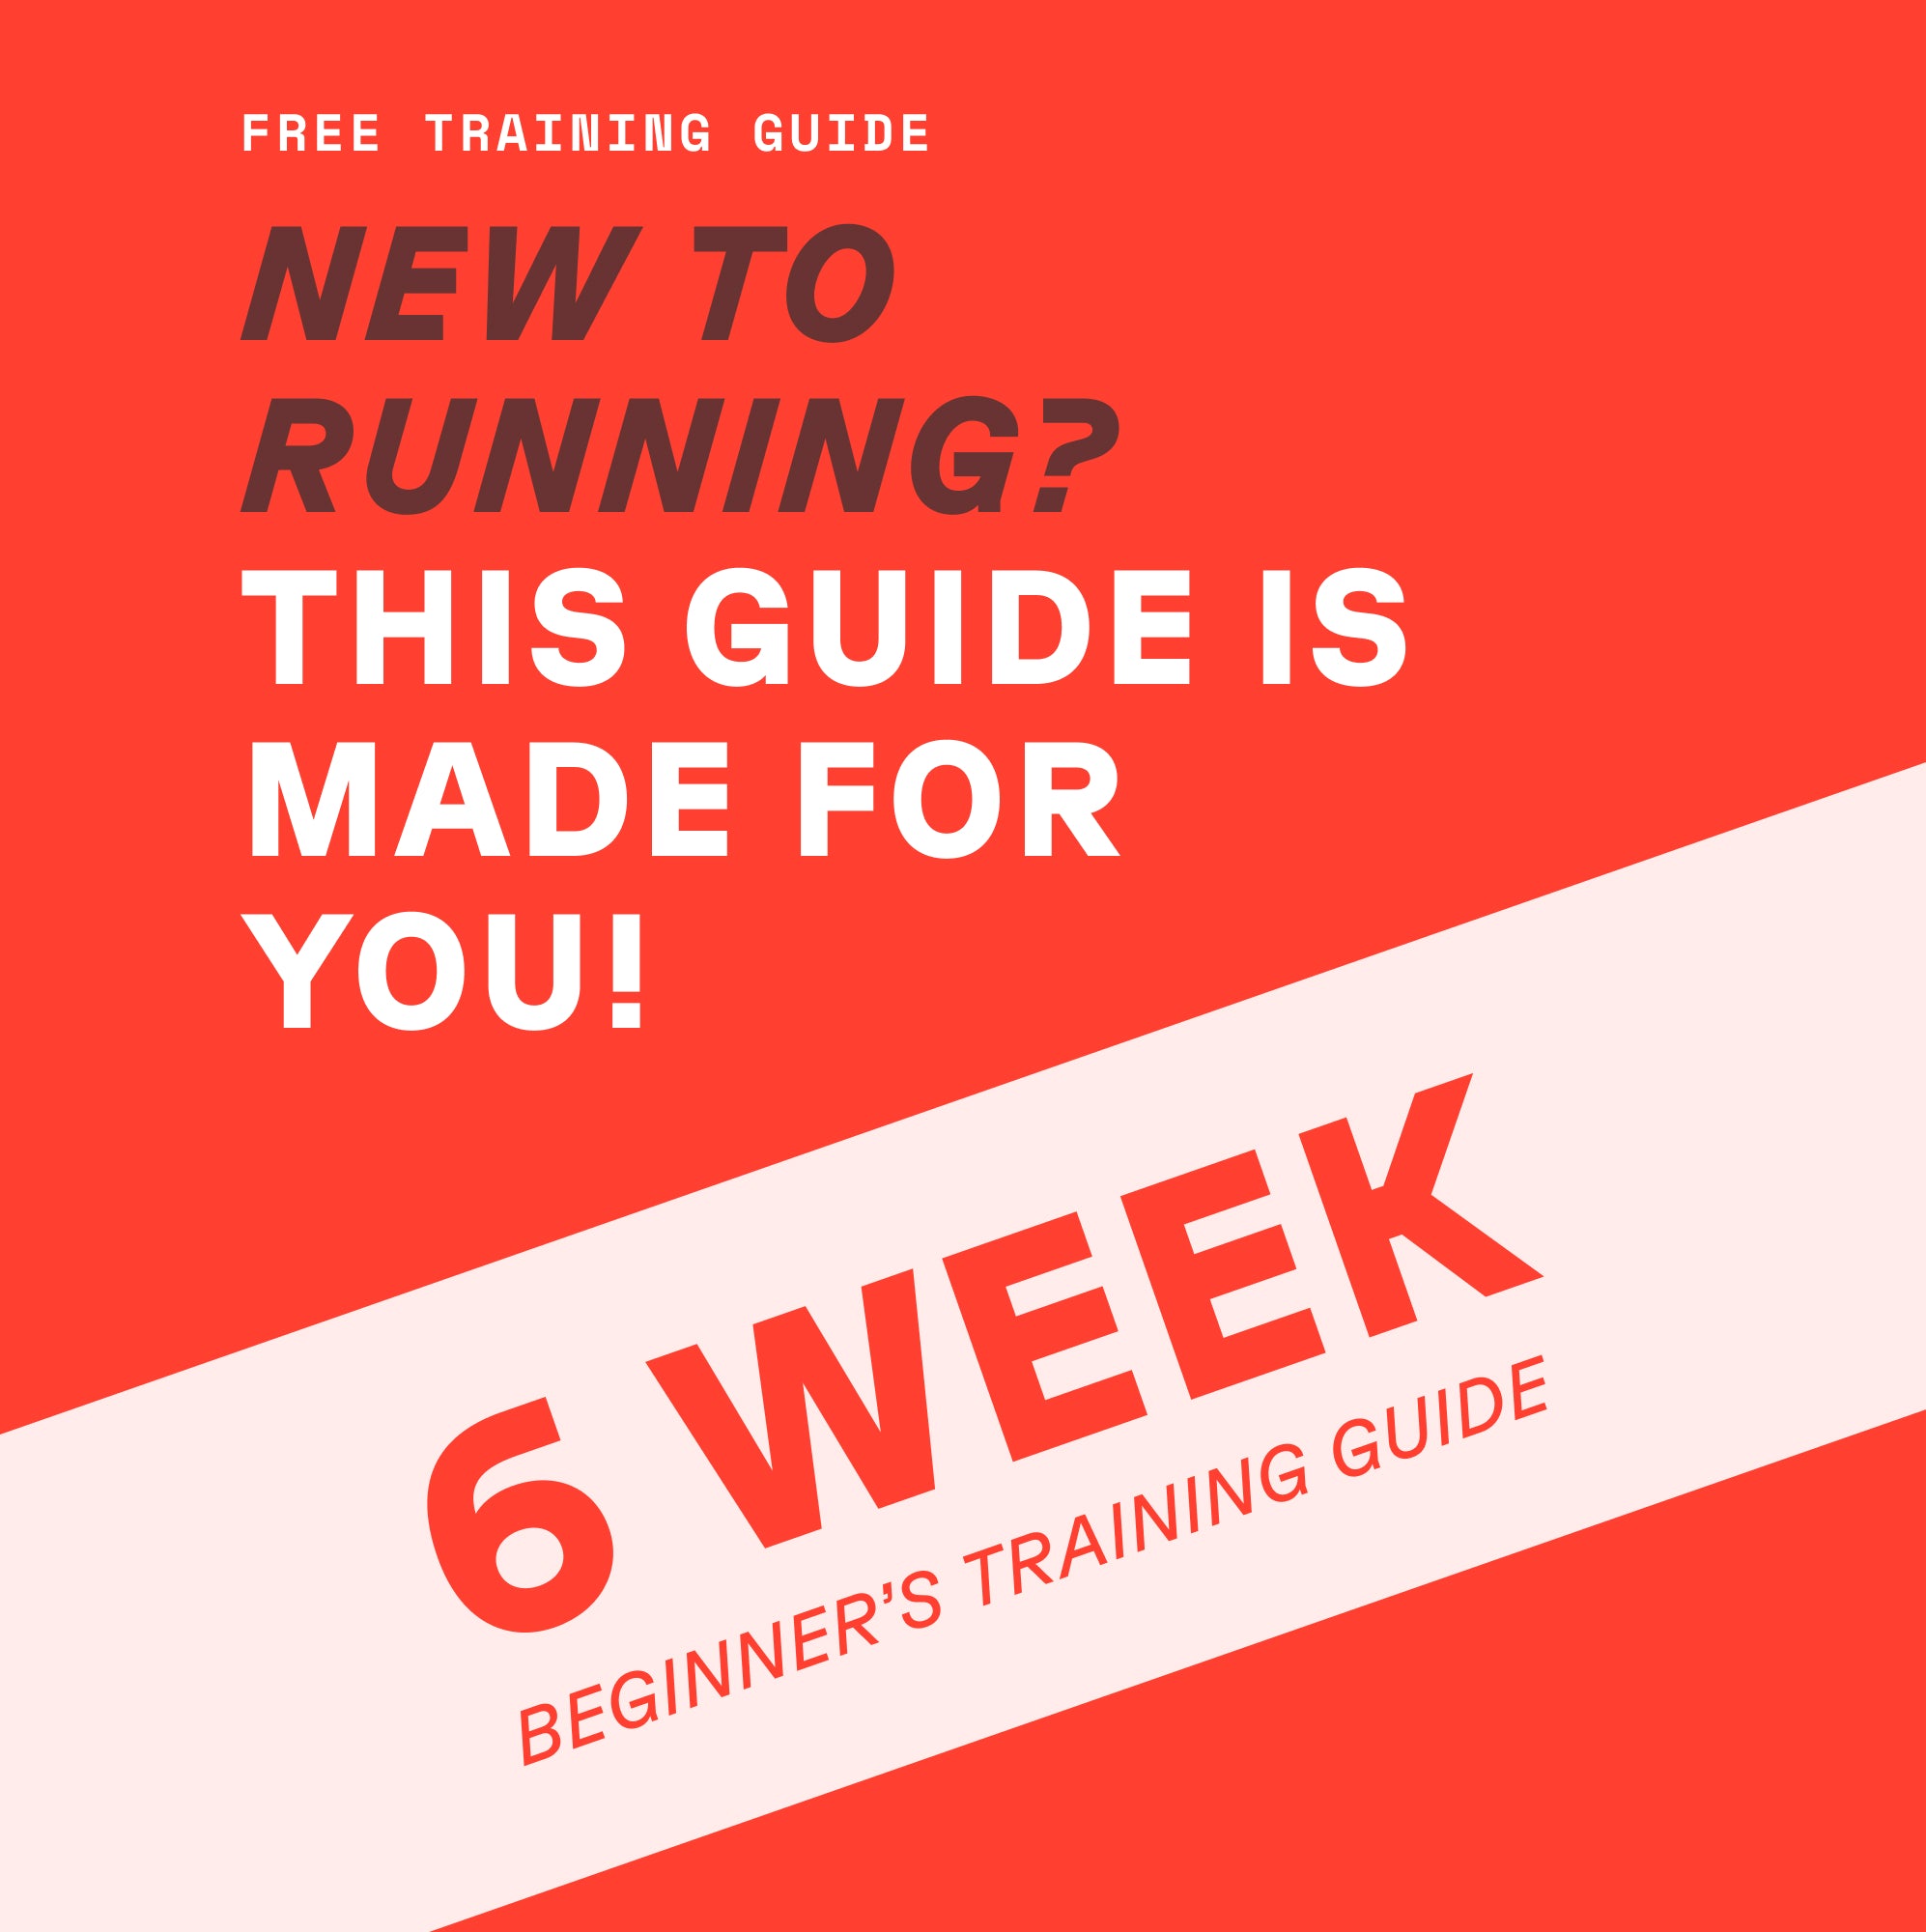 FREE GUIDE // FOR BEGINNERS